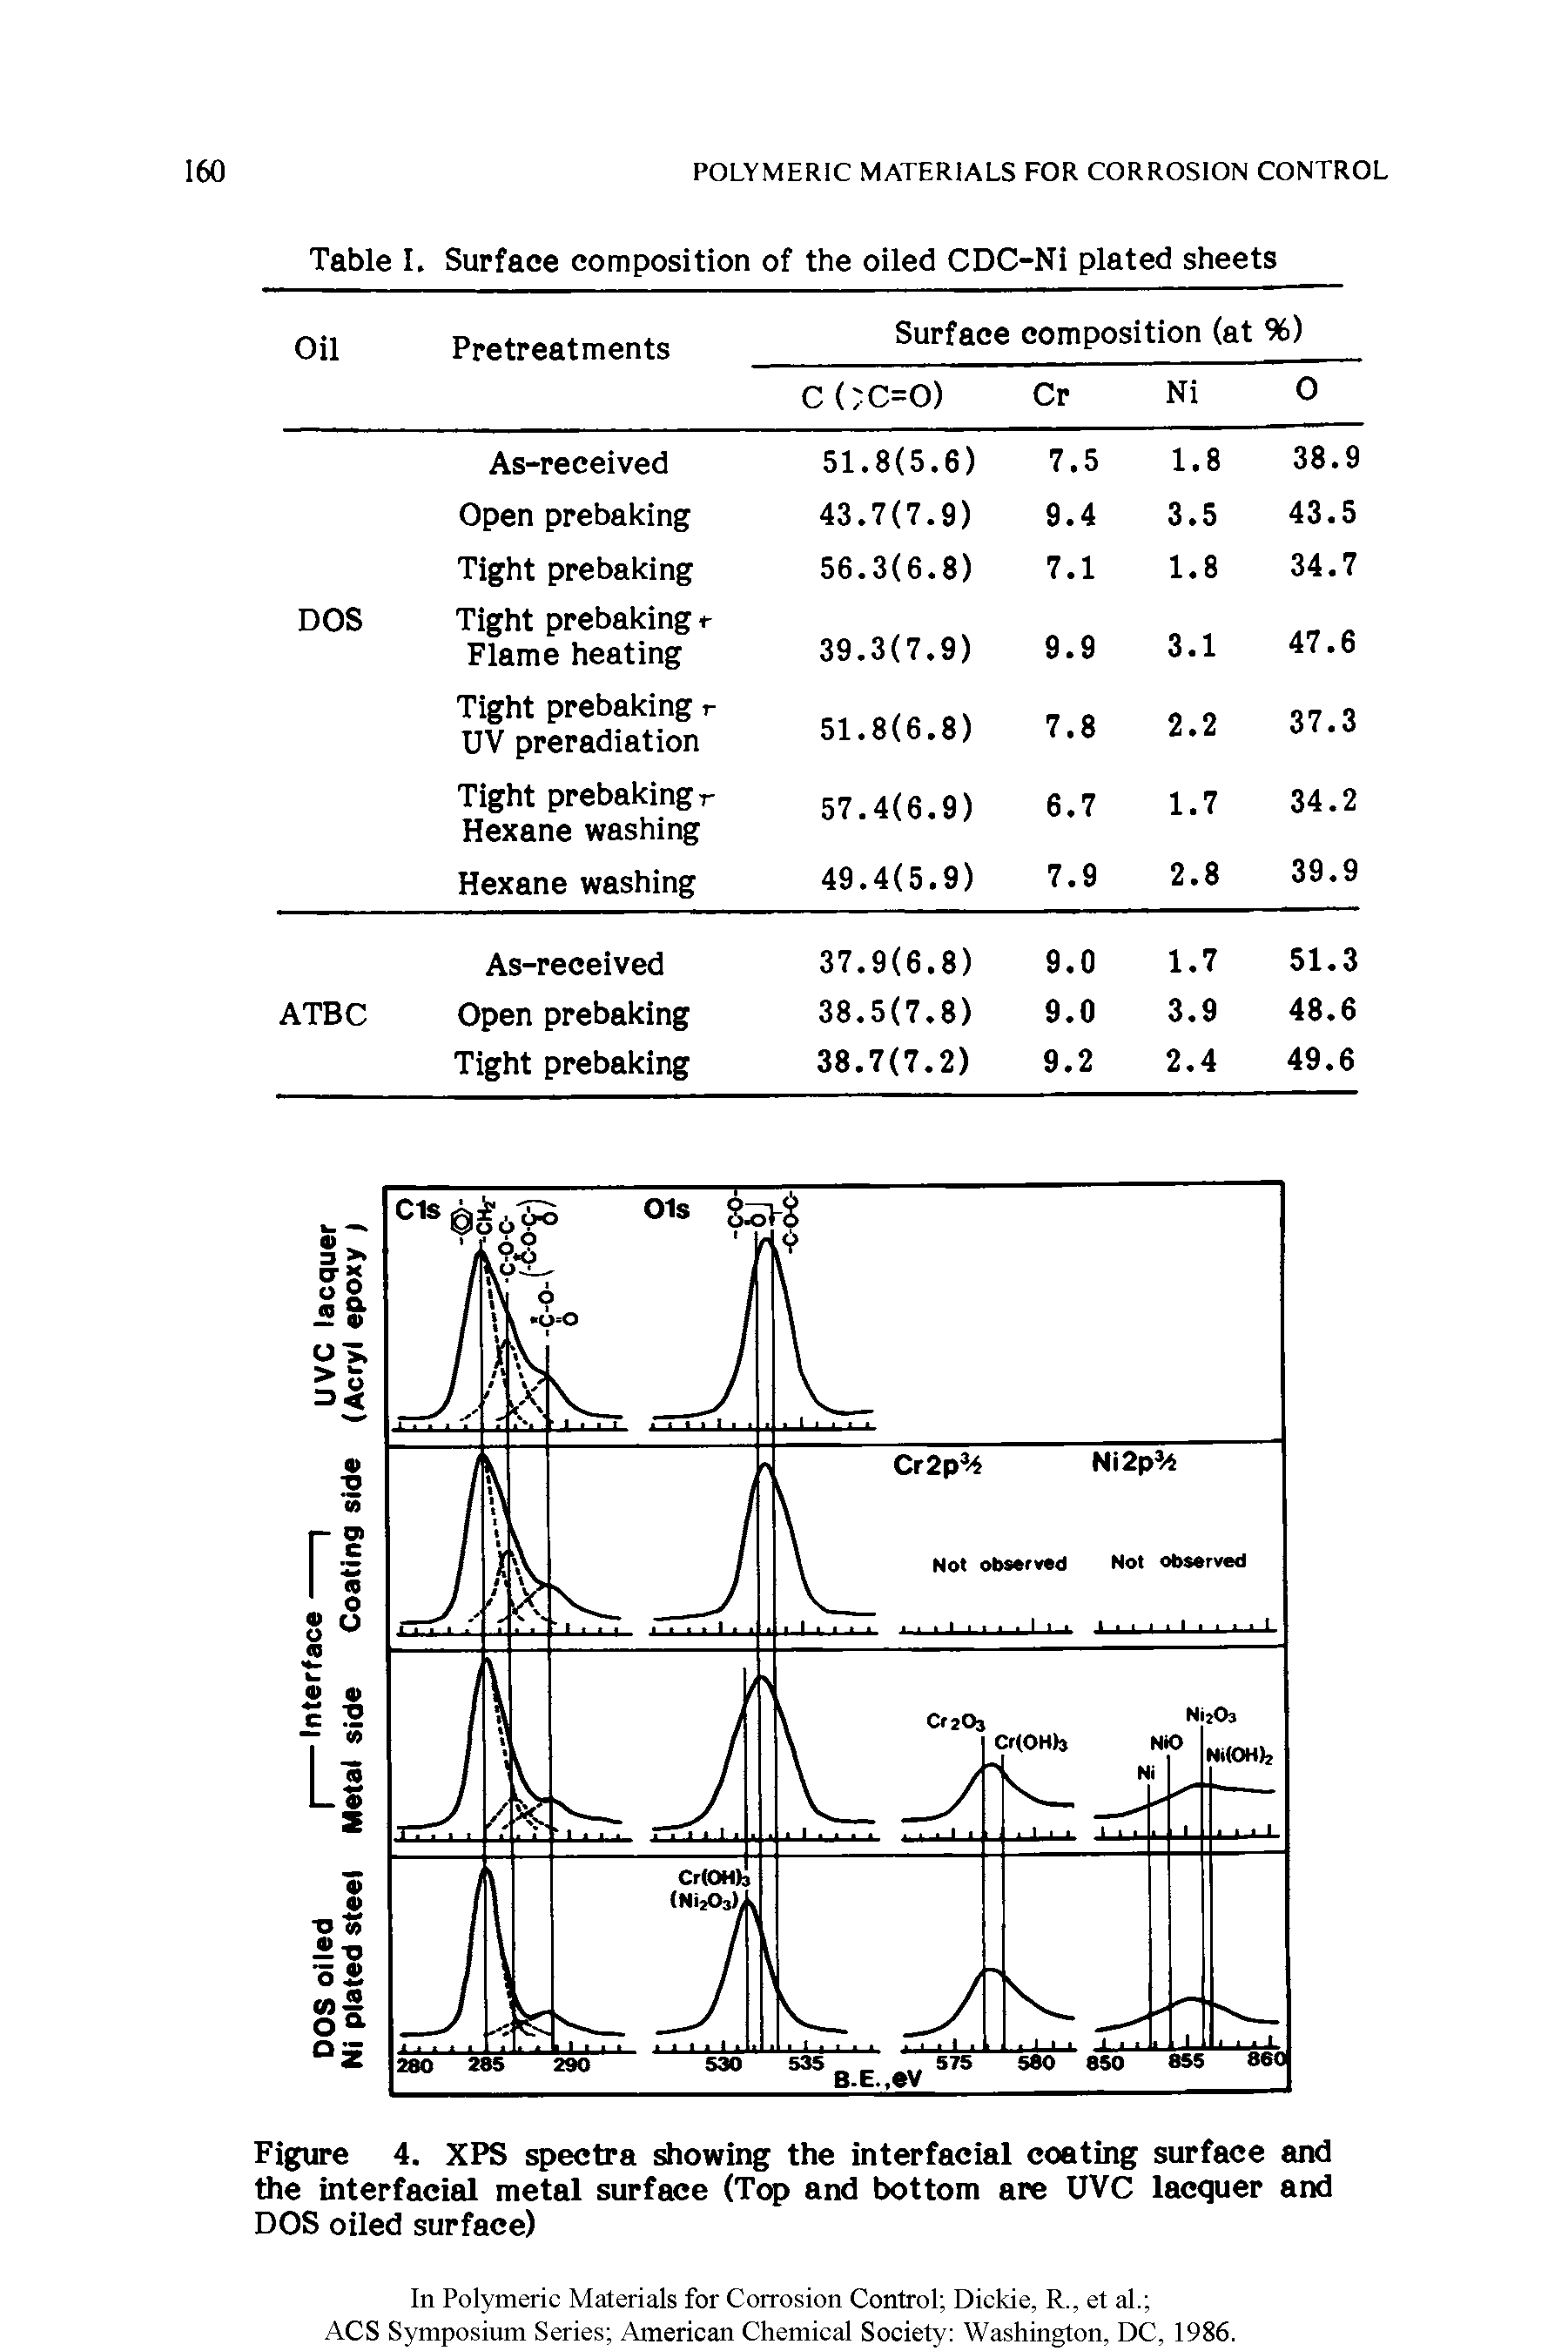 Figure 4. XPS spectra showing the interfacial coating surface and the interfacial metal surface (Top and bottom are UVC lacquer and DOS oiled surface)...